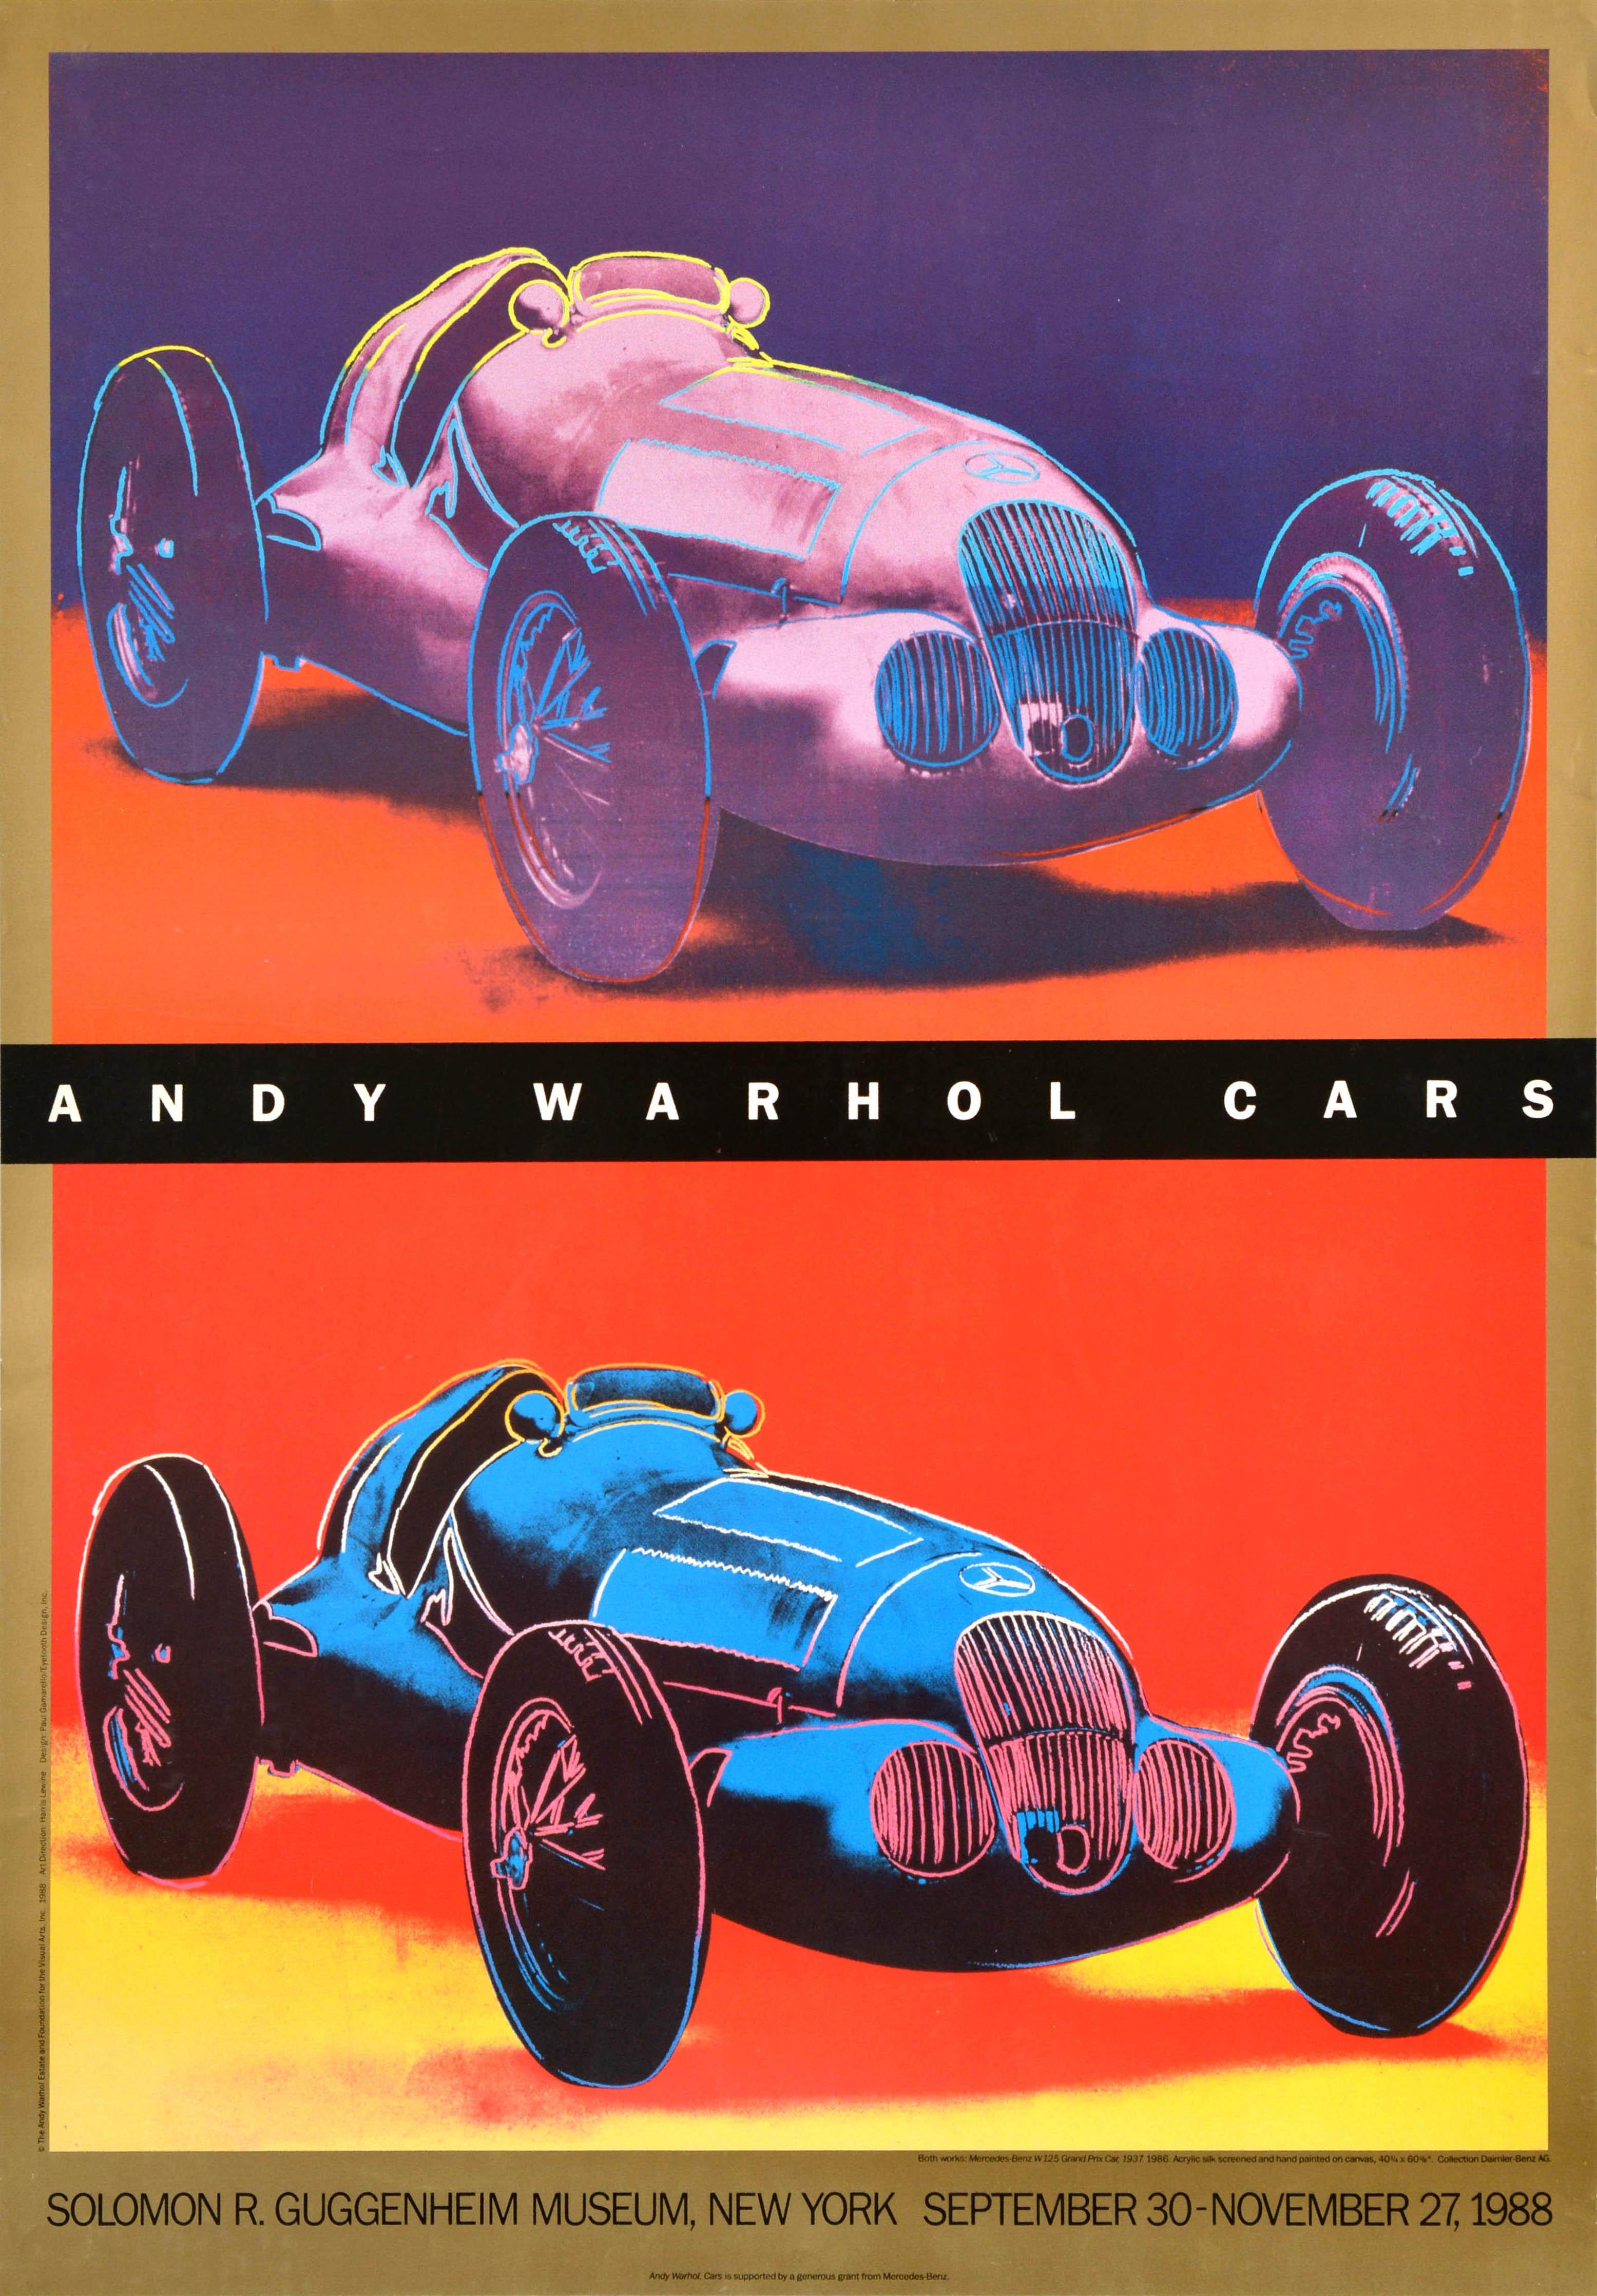 Original vintage advertising poster for the Andy Warhol Cars exhibition at the Solomon R. Guggenheim Museum New York held from 30 September to 27 November 1988 featuring a colourful image of two Mercedes Benz racing cars on purple, red and yellow